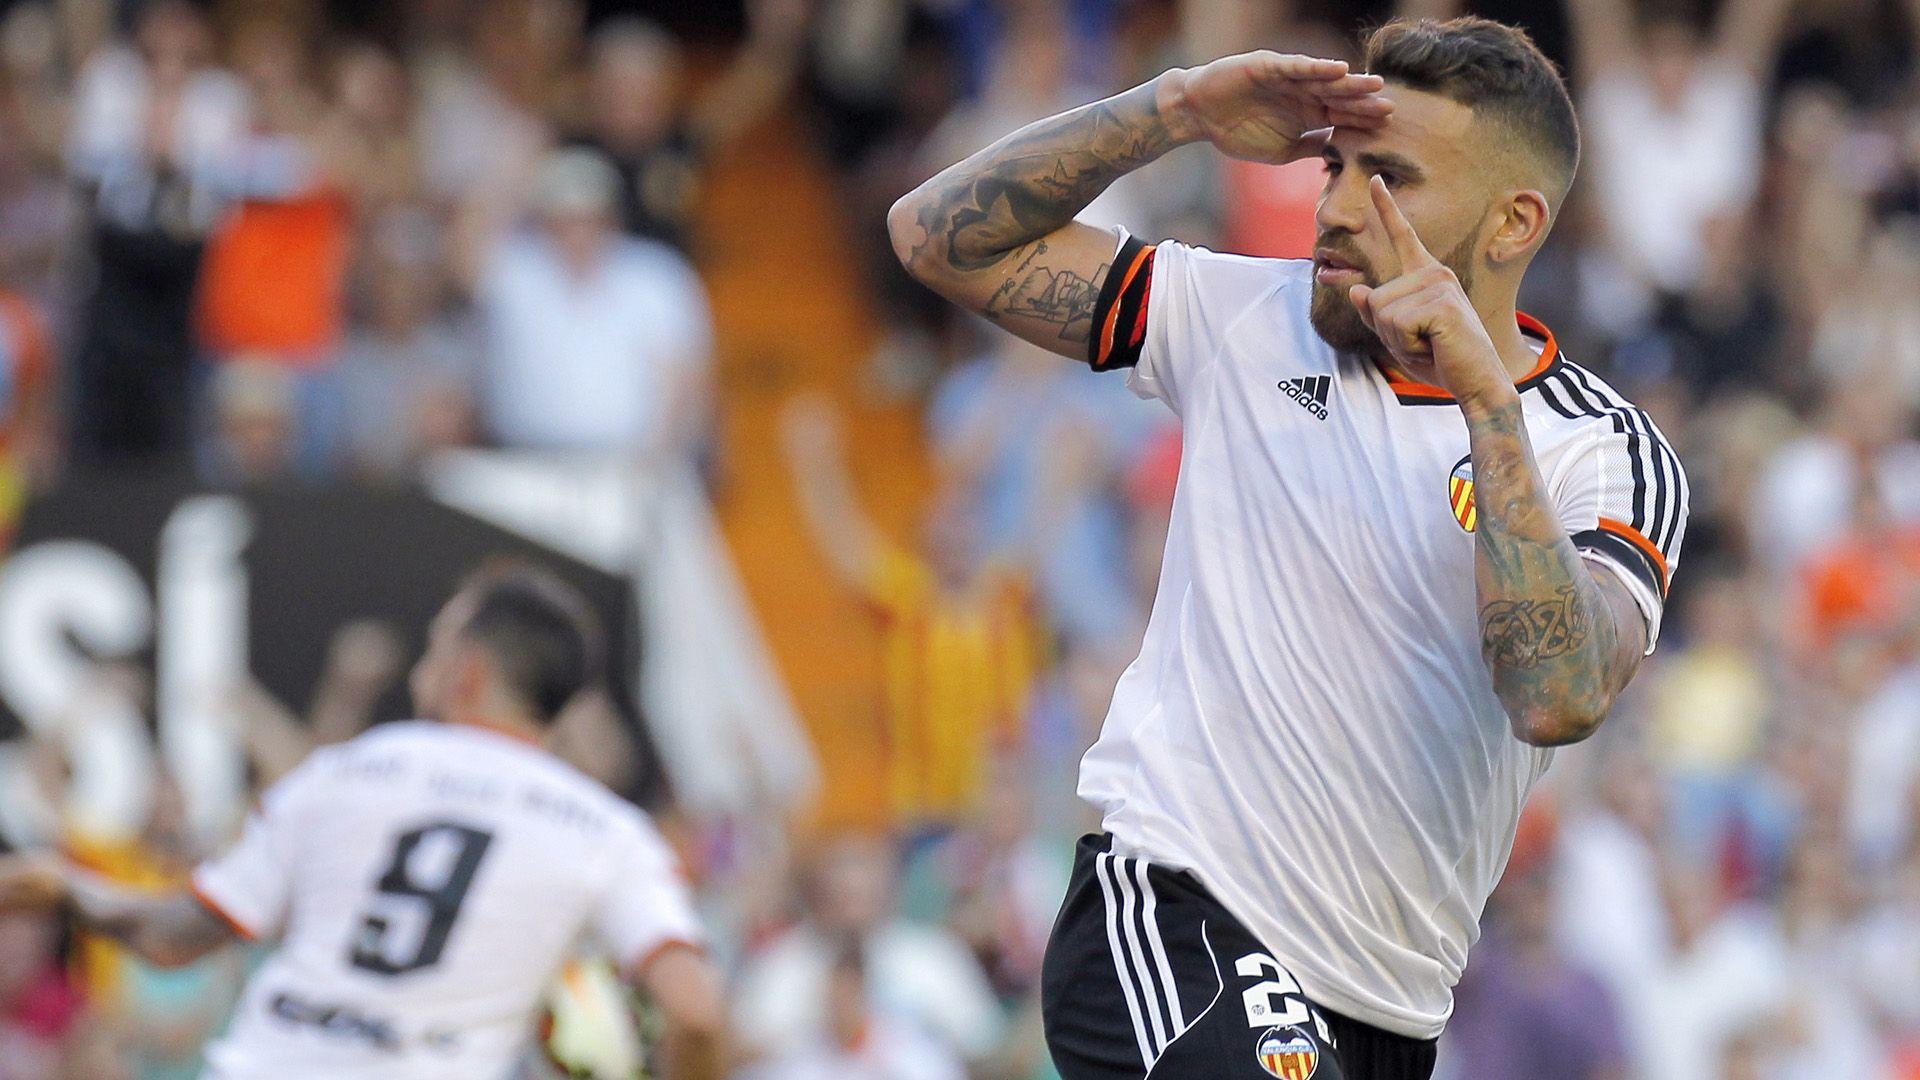 Nicolas Otamendi: All you need to know about Man City's new